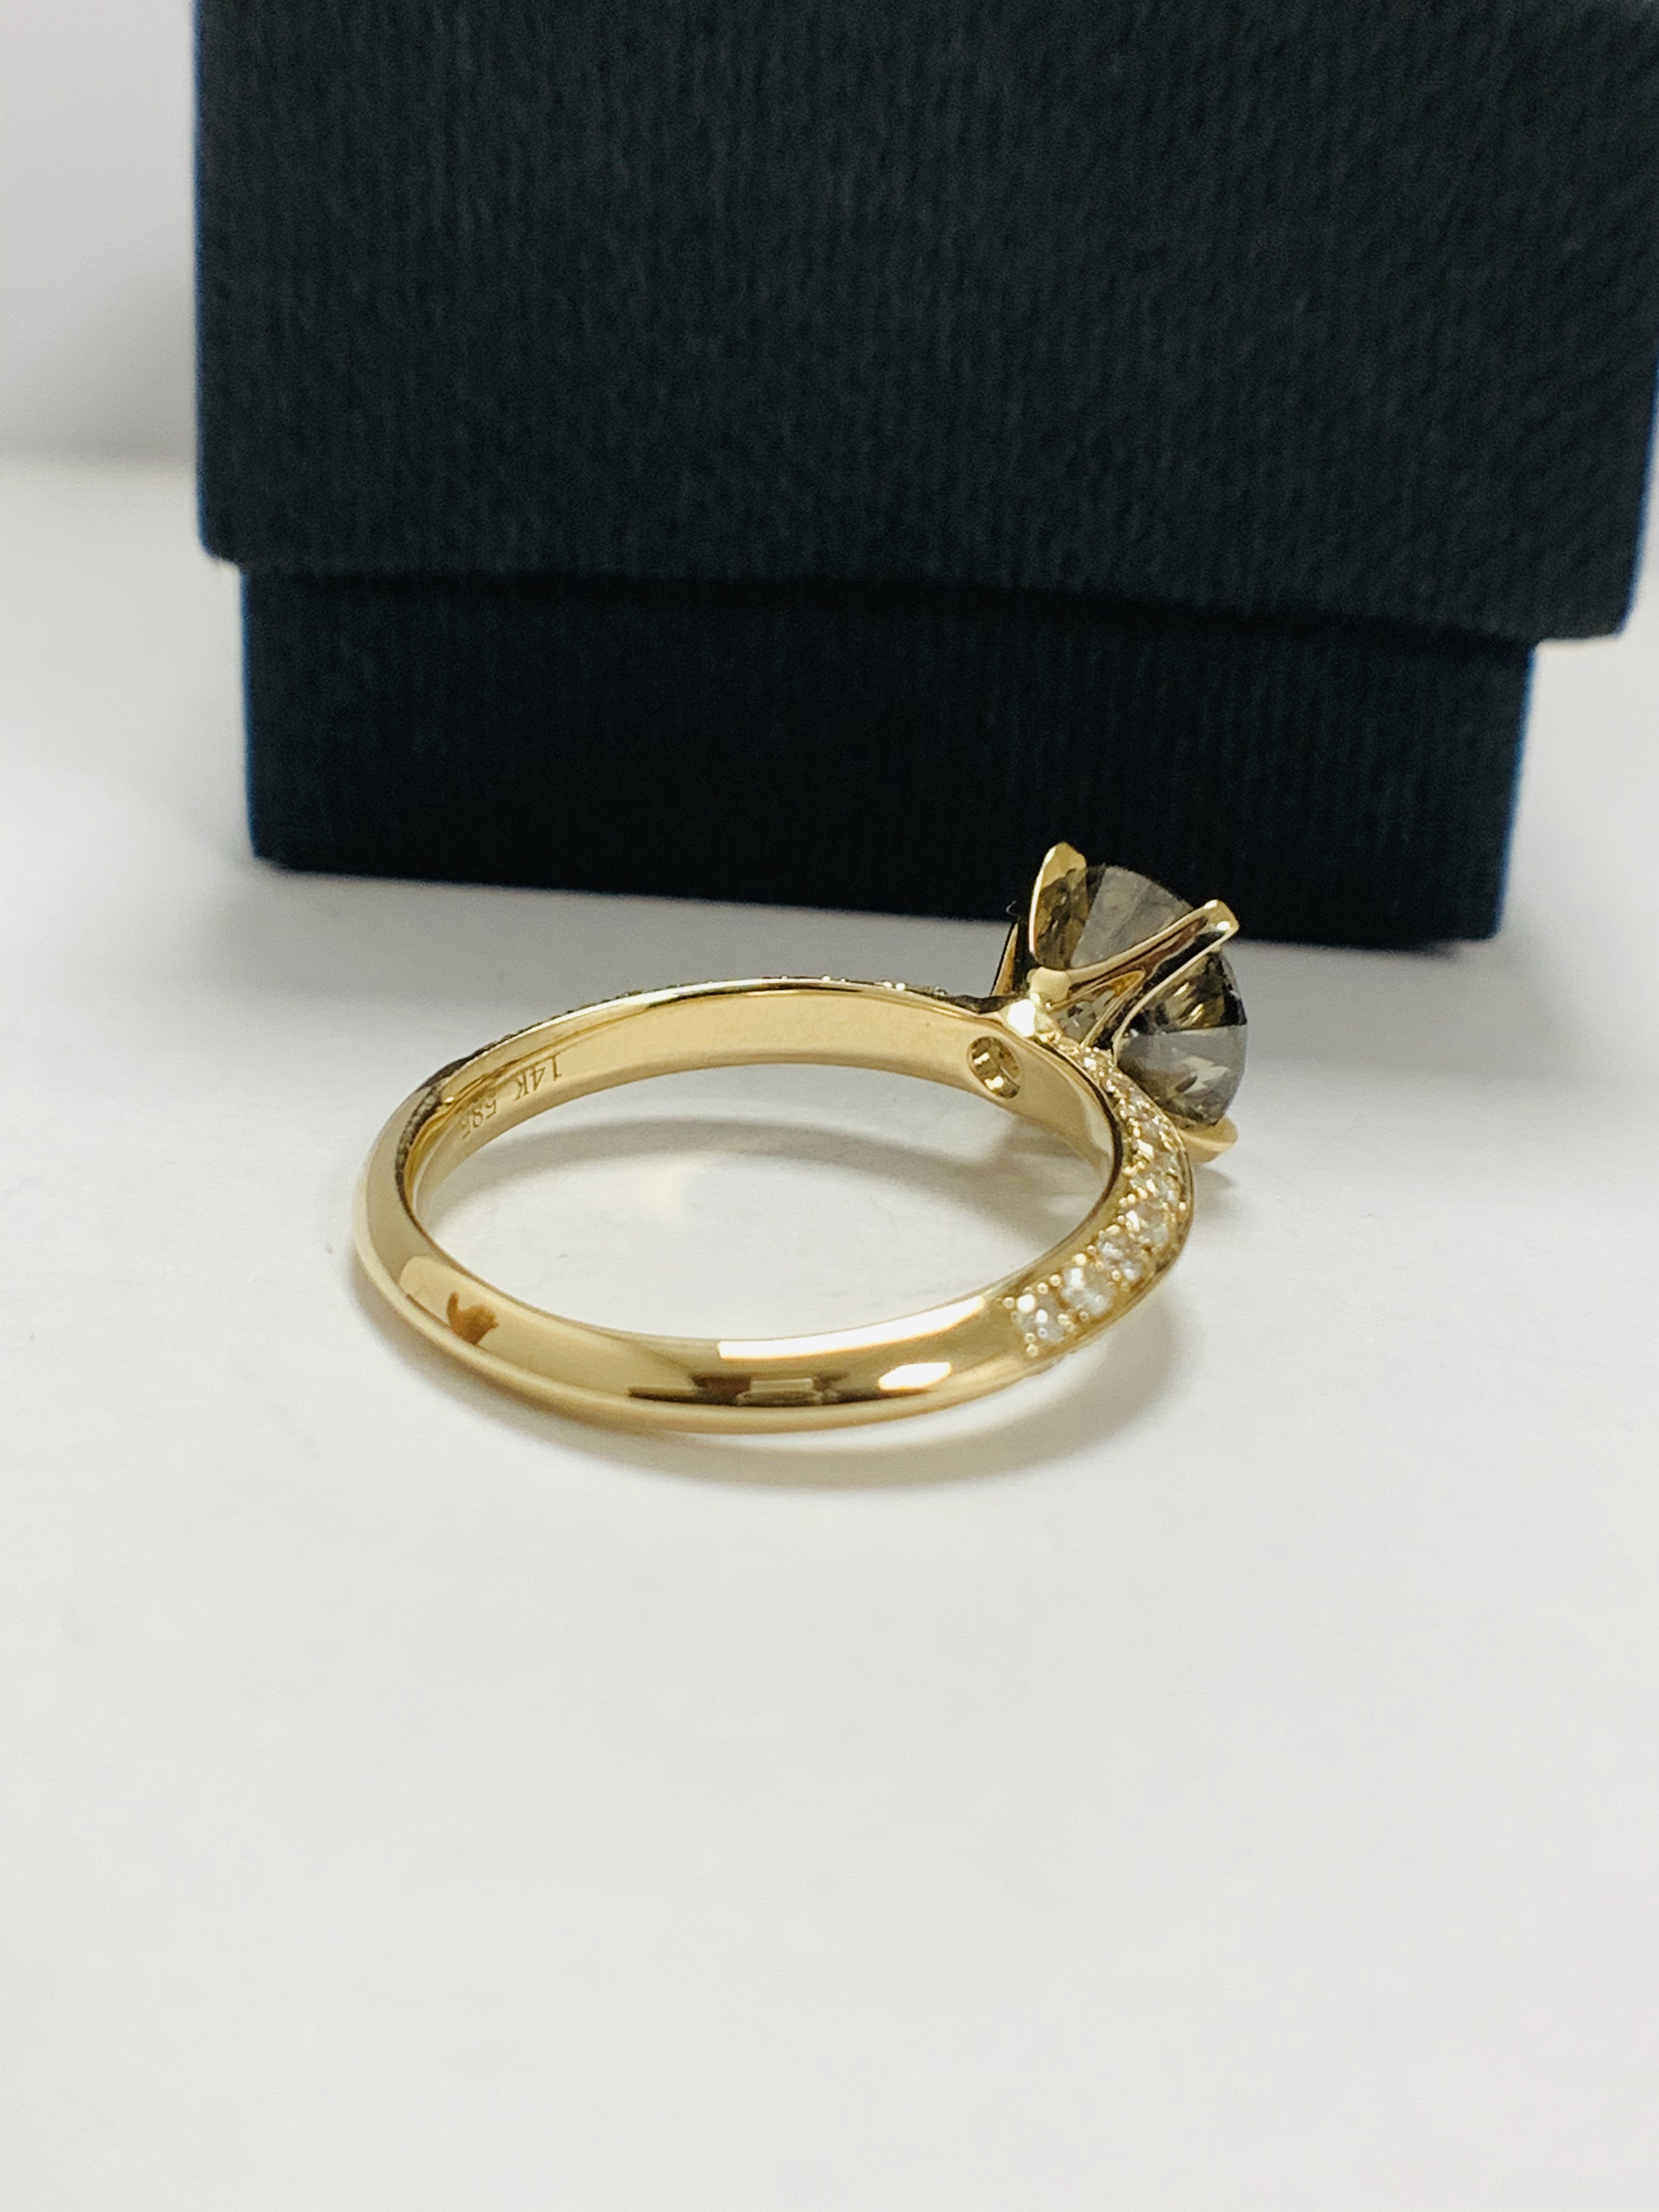 14ct Yellow Gold Diamond ring featuring centre, round brilliant cut, cognac Diamond (2.03ct), claw s - Image 7 of 13